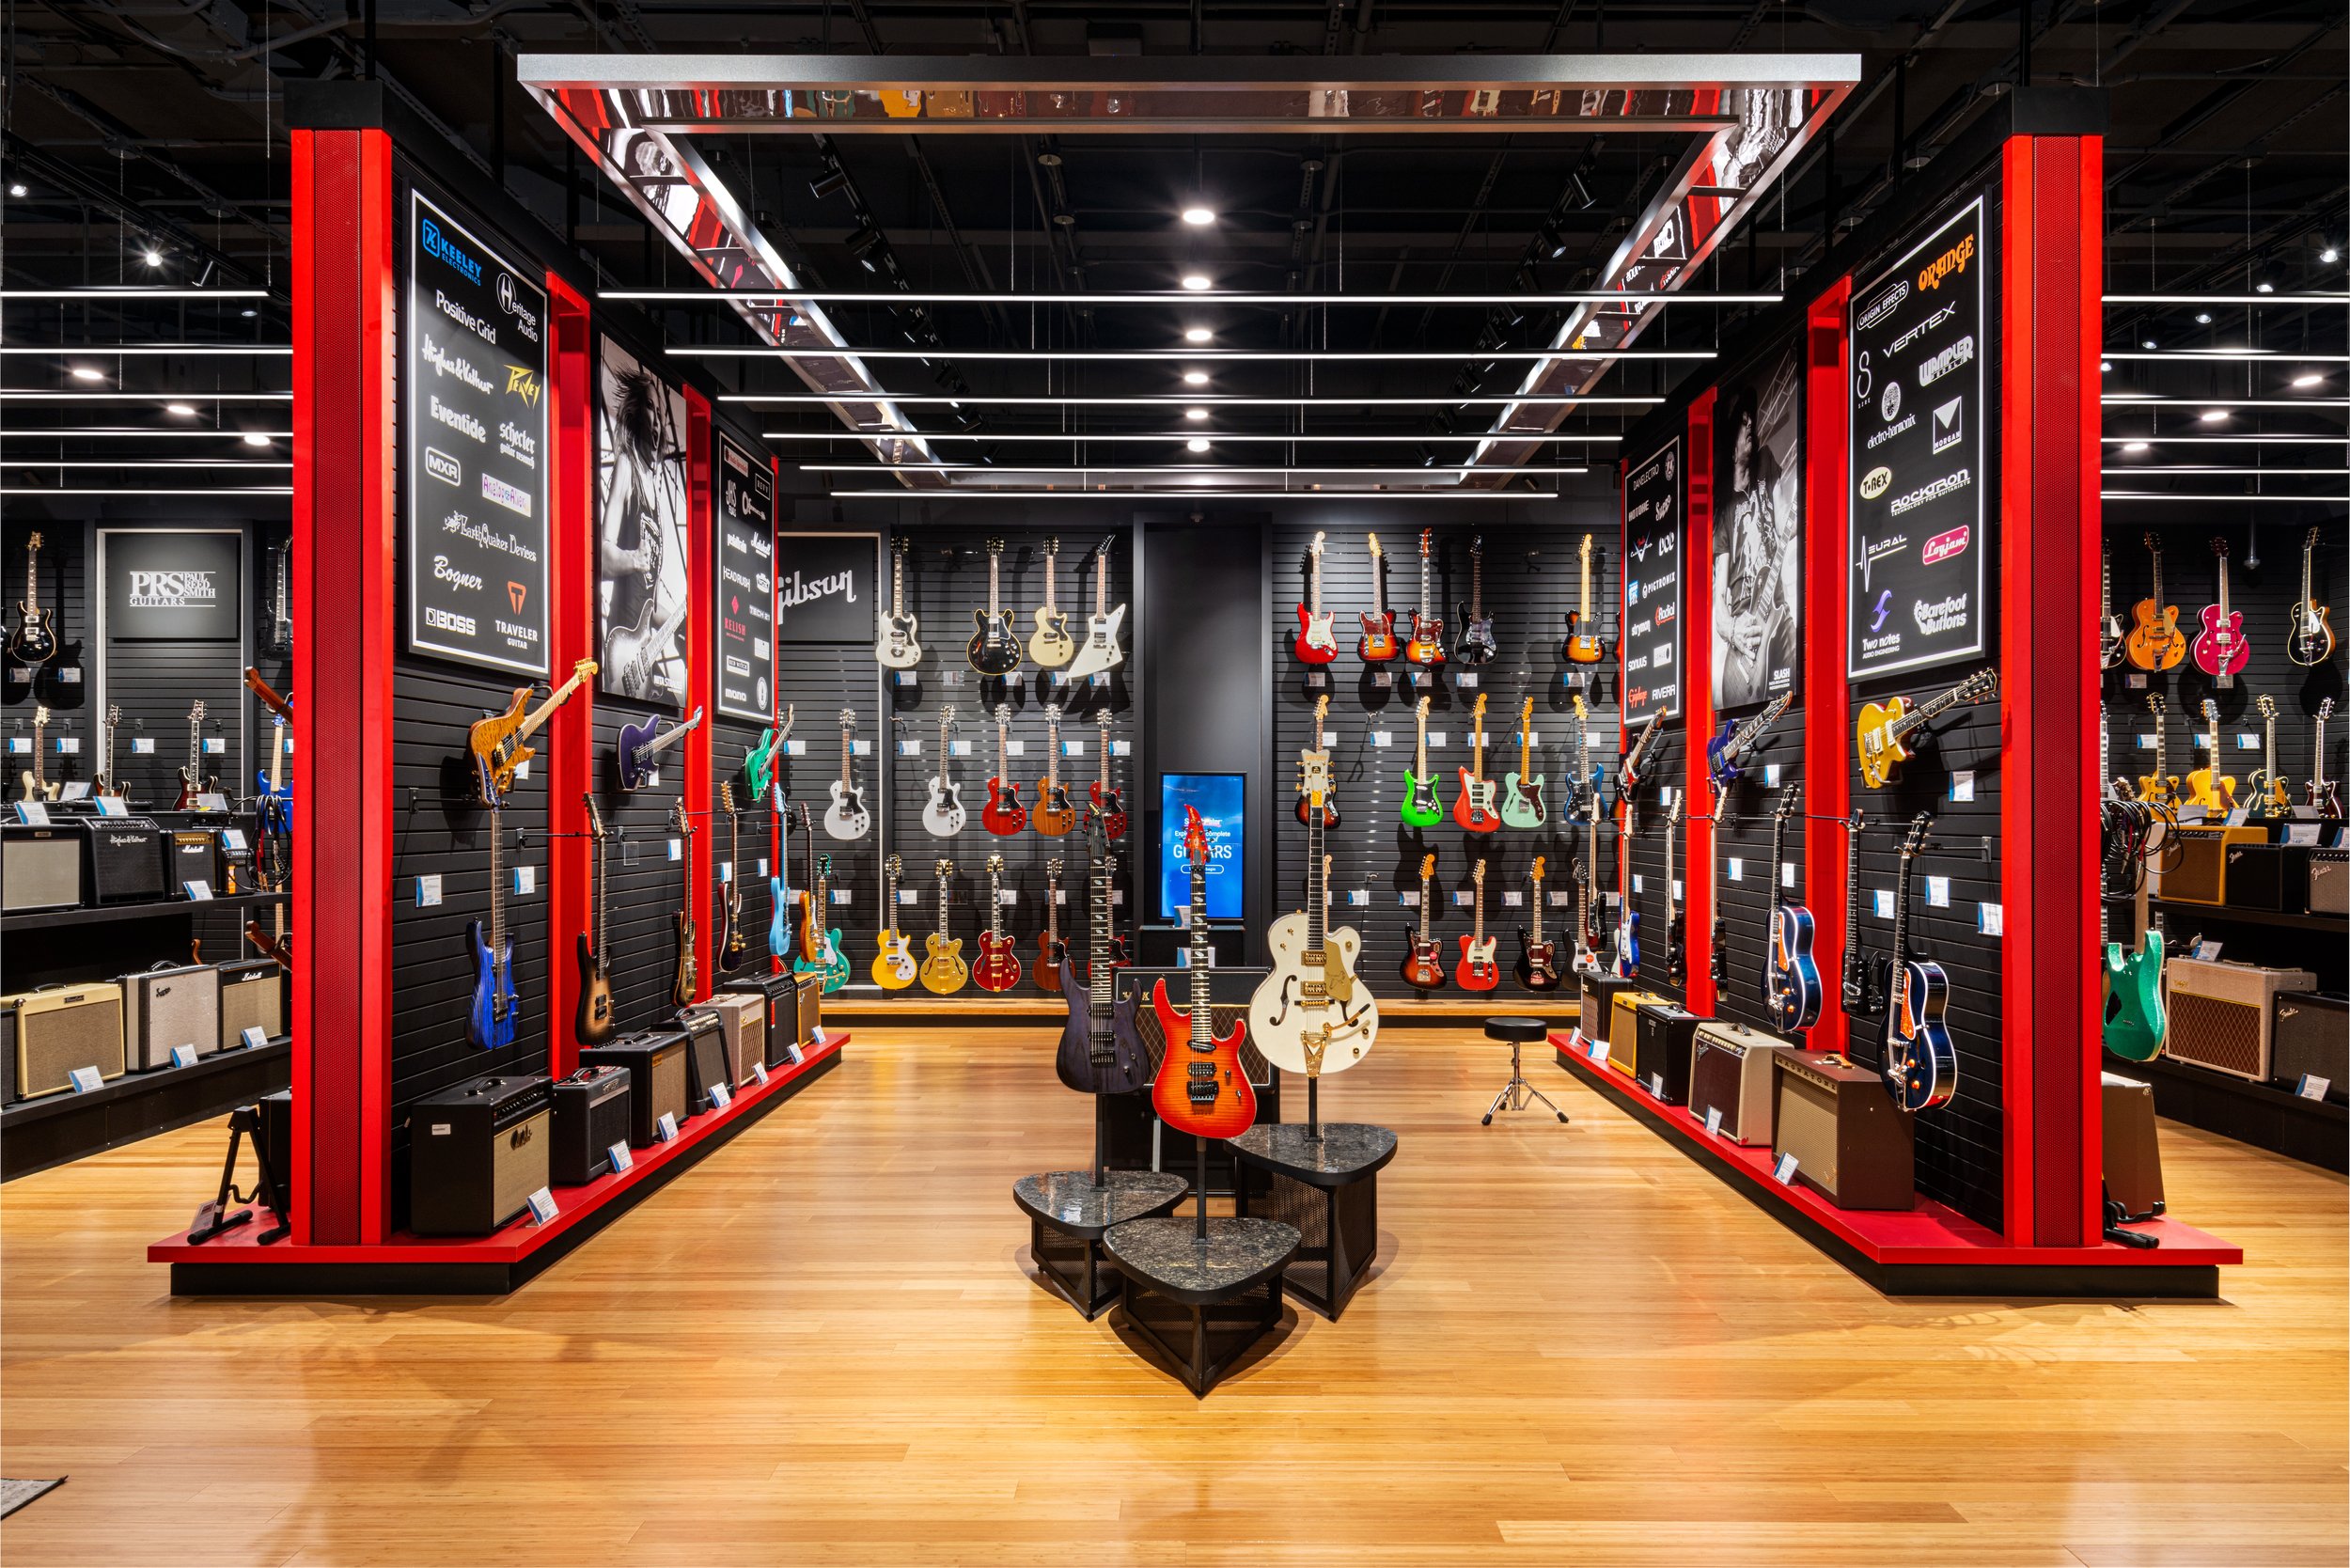 Interior photography of lots of colorful electric guitars in a music shop in Indiana.